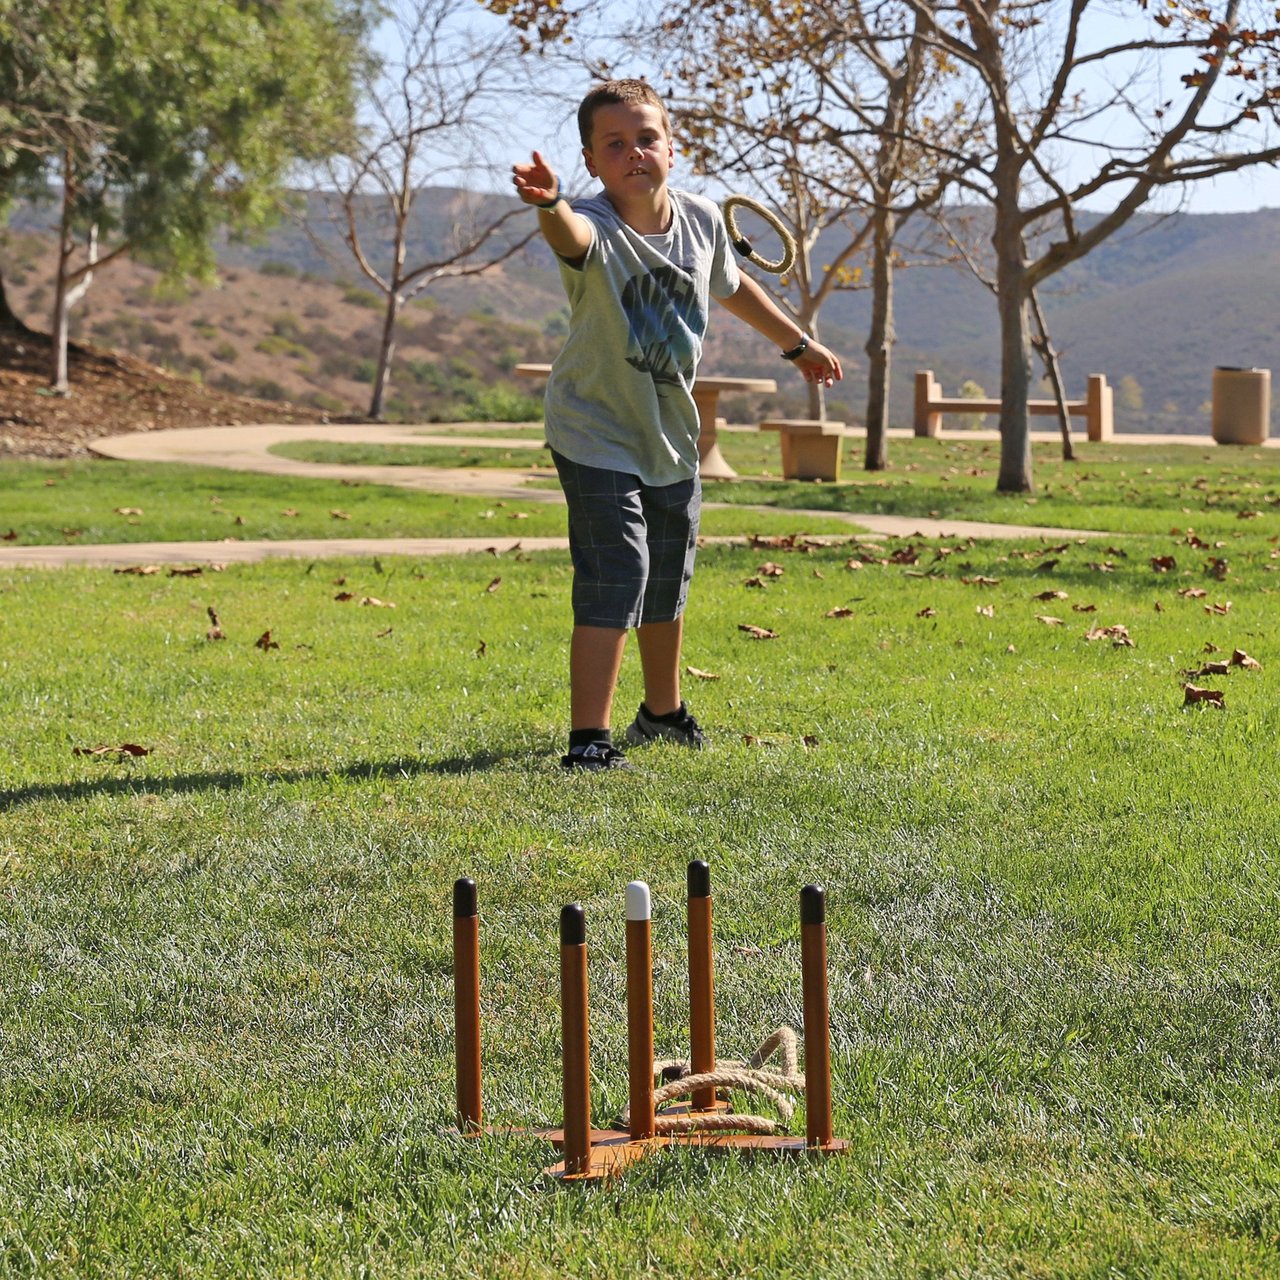 Quoits Ring Toss Game